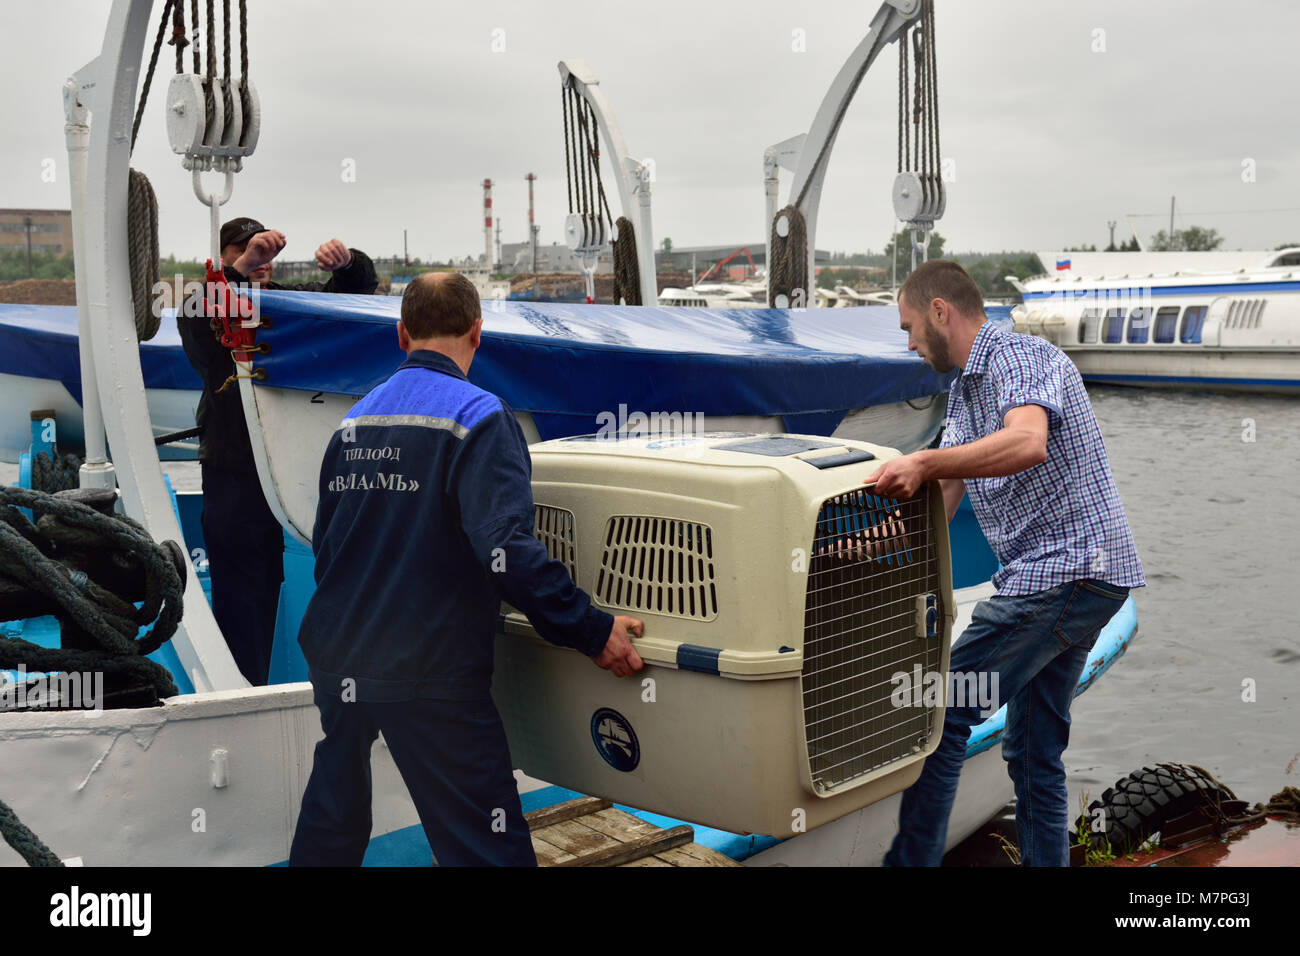 Priozersk, Leningrad oblast, Russia - July 29, 2015: People carrying the cage with Ladoga ringed seal to the ship. Animals were cured in the Center of Stock Photo